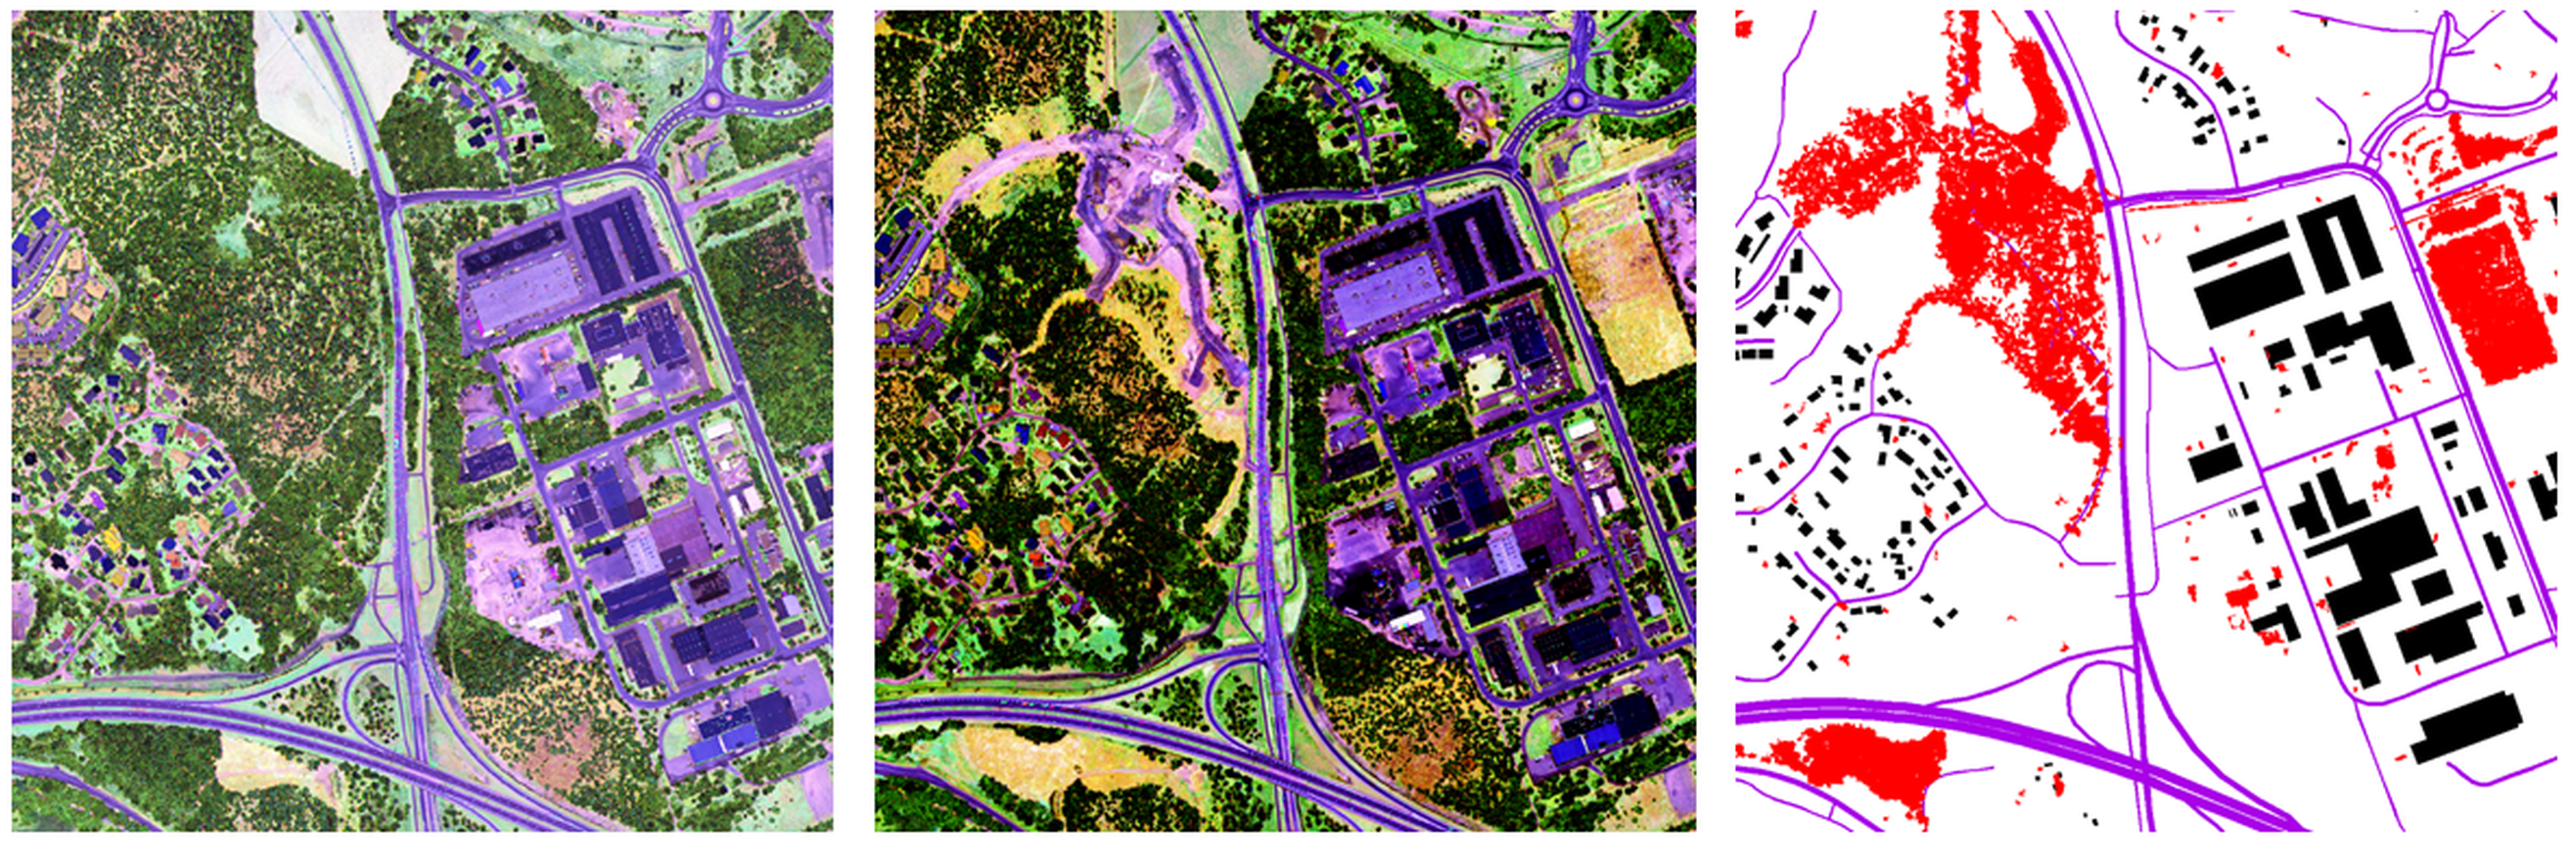 Intensity images from Optech Titan airborne laser scanner data from two dates and automatically detected changes presented in red colour with map data.